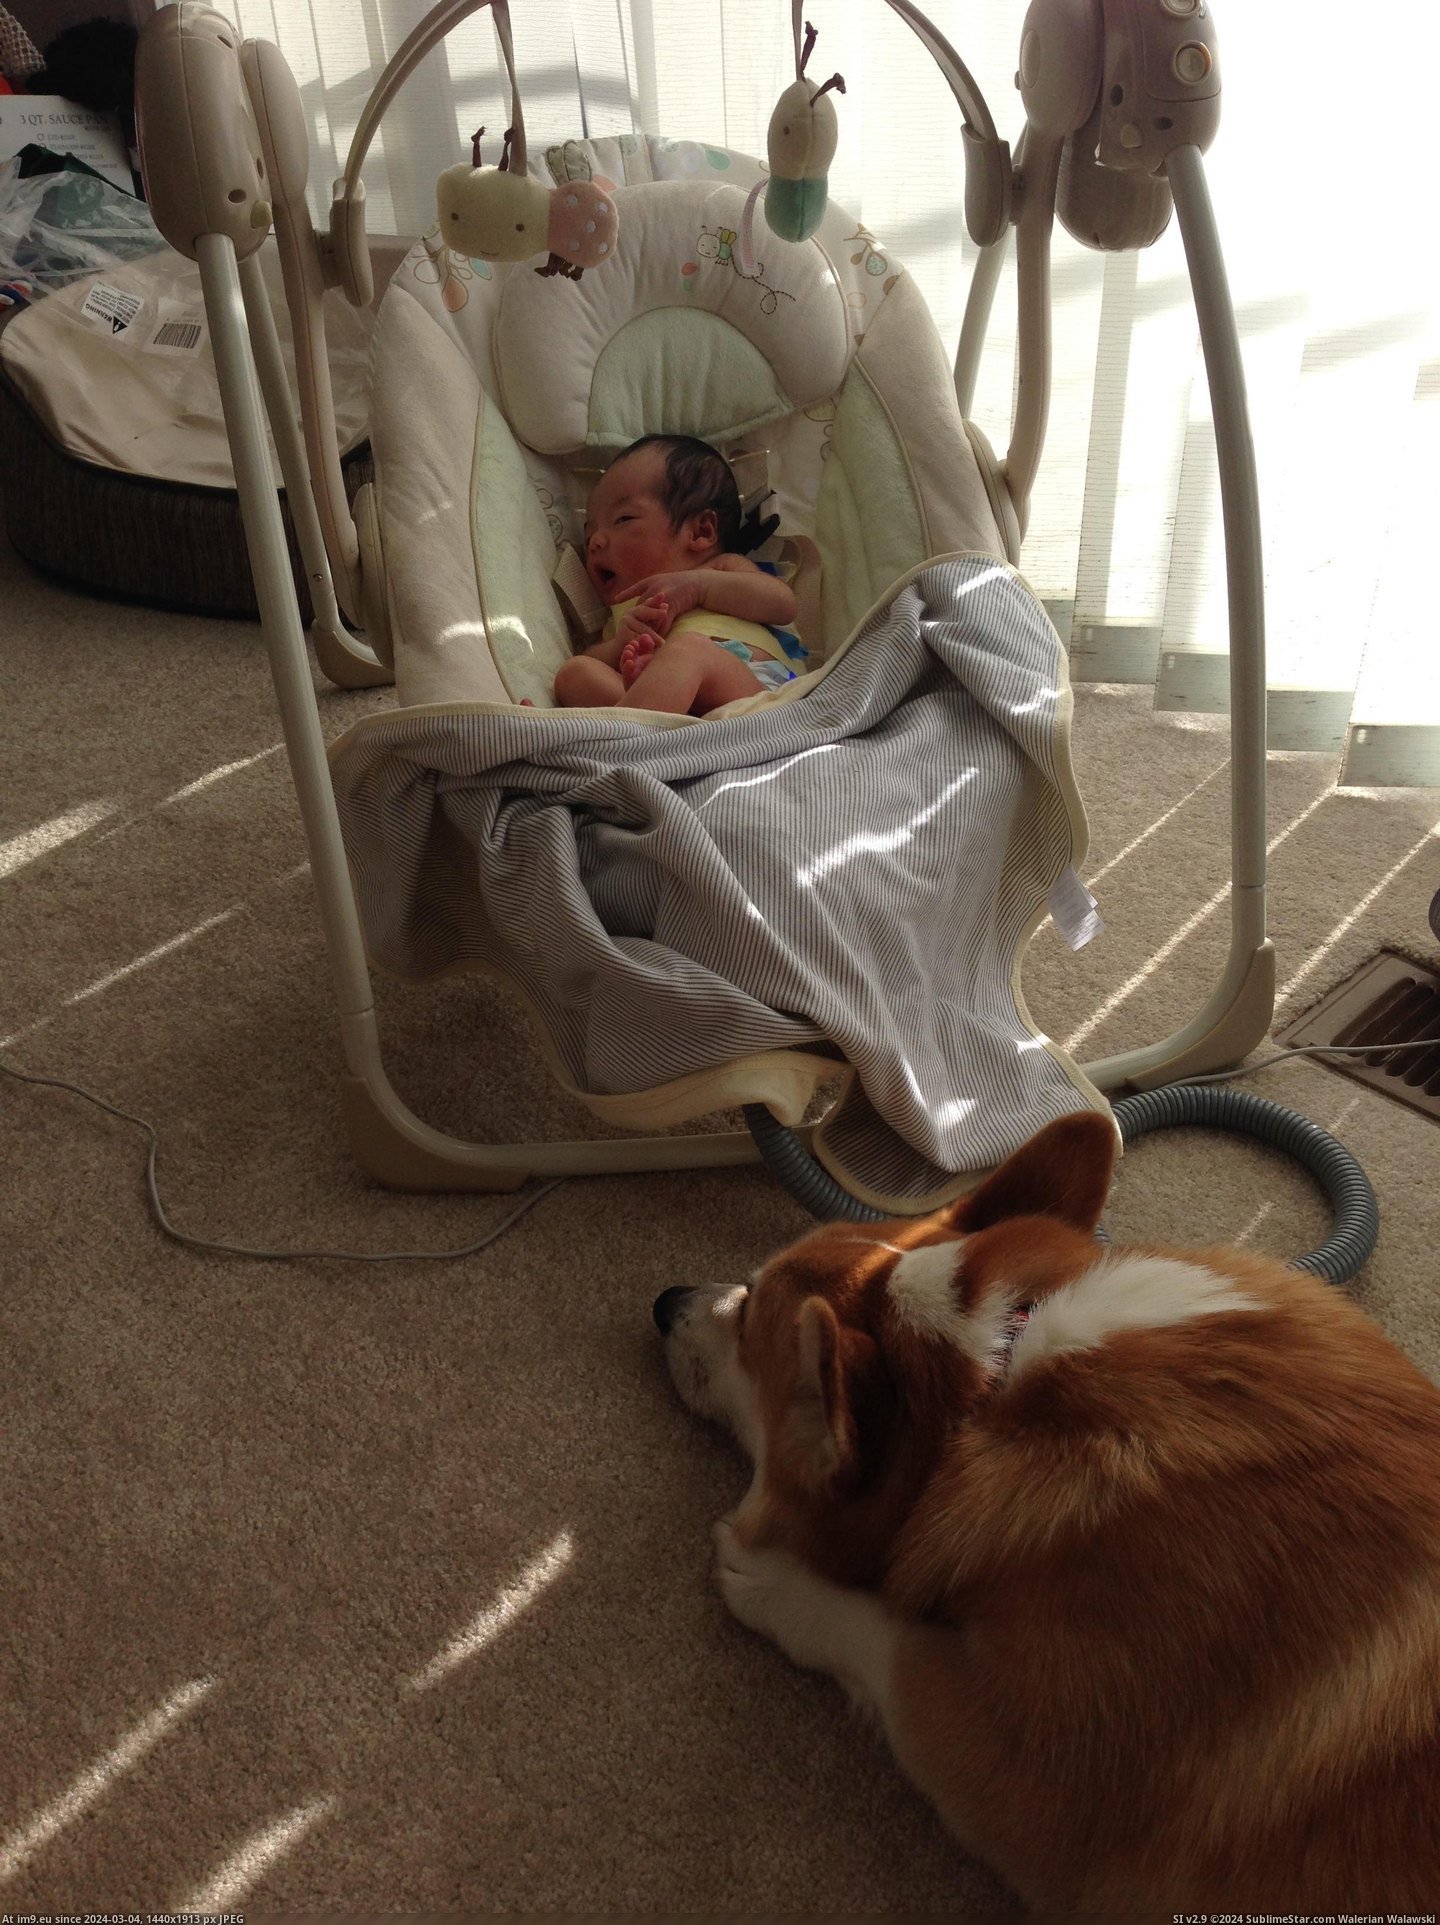 #Was #New #Ago #But #How #Daughter #Weeks #Born [Aww] My daughter was born three weeks ago. I worried about how my corgi would react but he's treating her like his new BFF... 6 Pic. (Изображение из альбом My r/AWW favs))